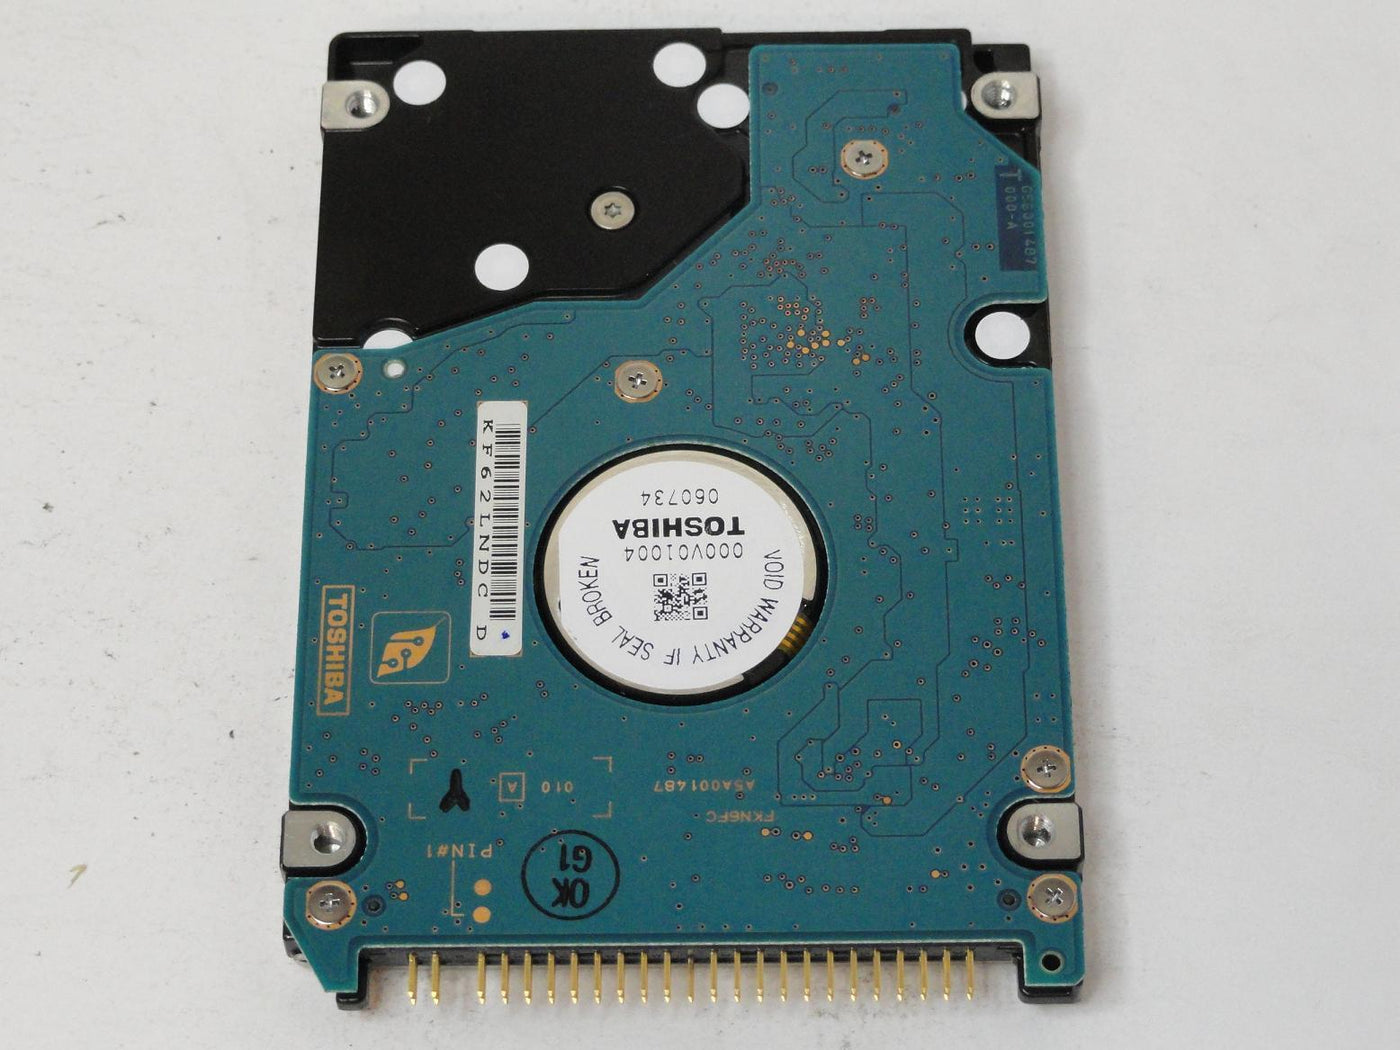 MC6762_HDD2D14_Toshiba Dell 60GB IDE 5400rpm 2.5in HDD - Image2